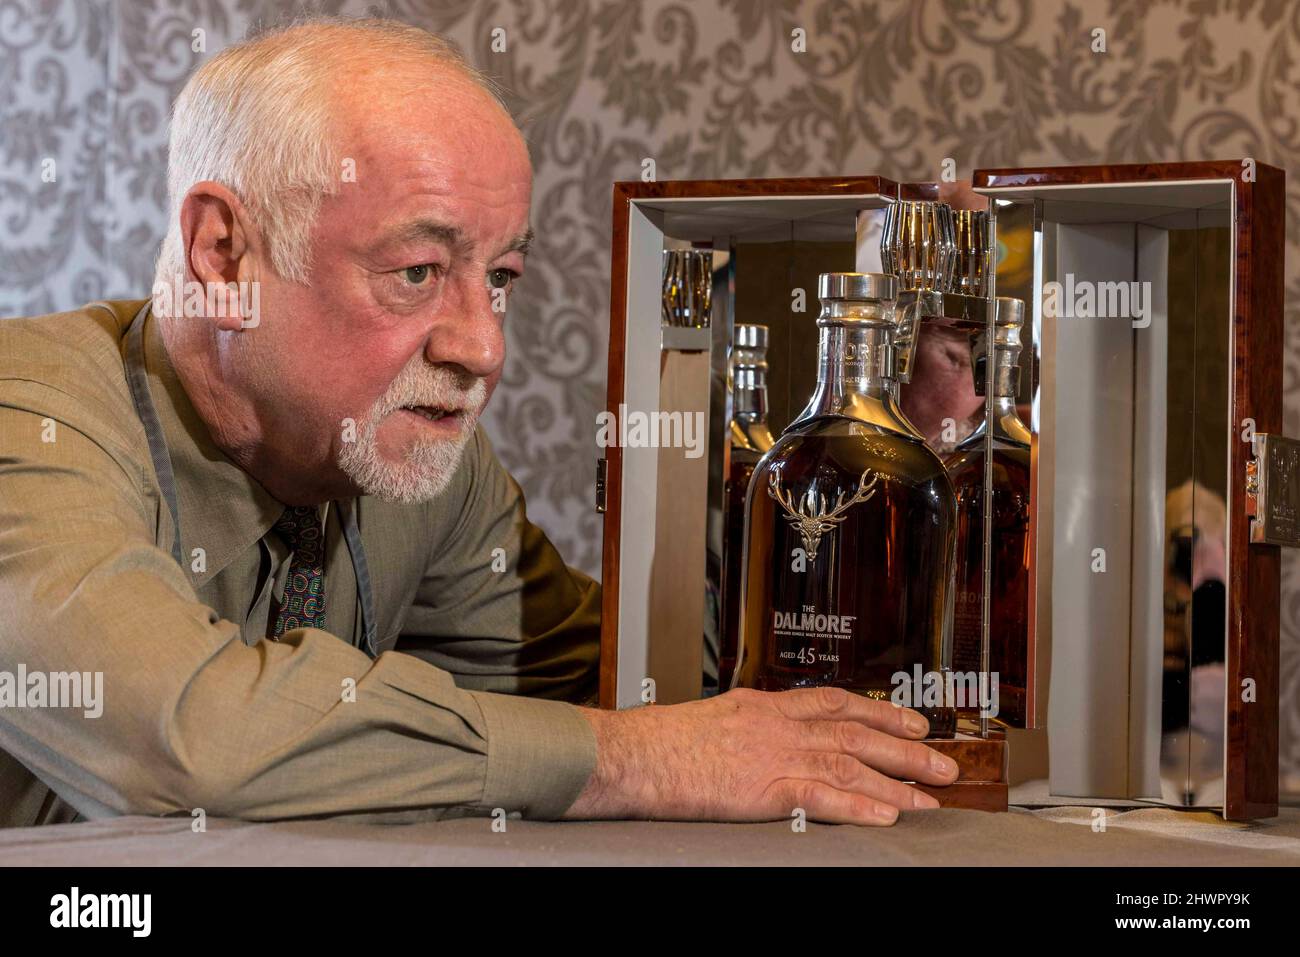 Edinburgh, United Kingdom. 07 March, 2022 Pictured: L to R Bonhams Danny Mcilwraith with a Dalmore 45-year old bottled in a Baccarat crystal decanter estimated to make £7, 000-8, 000. A bottle of one of the oldest known Macallan Scotch Whisky ever produced – The Macallan-78 year old – leads the auction for Bonhams Whisky sale in Edinburgh with an estimate of £65,000 - £70,000. Credit: Rich Dyson/Alamy Live News Stock Photo